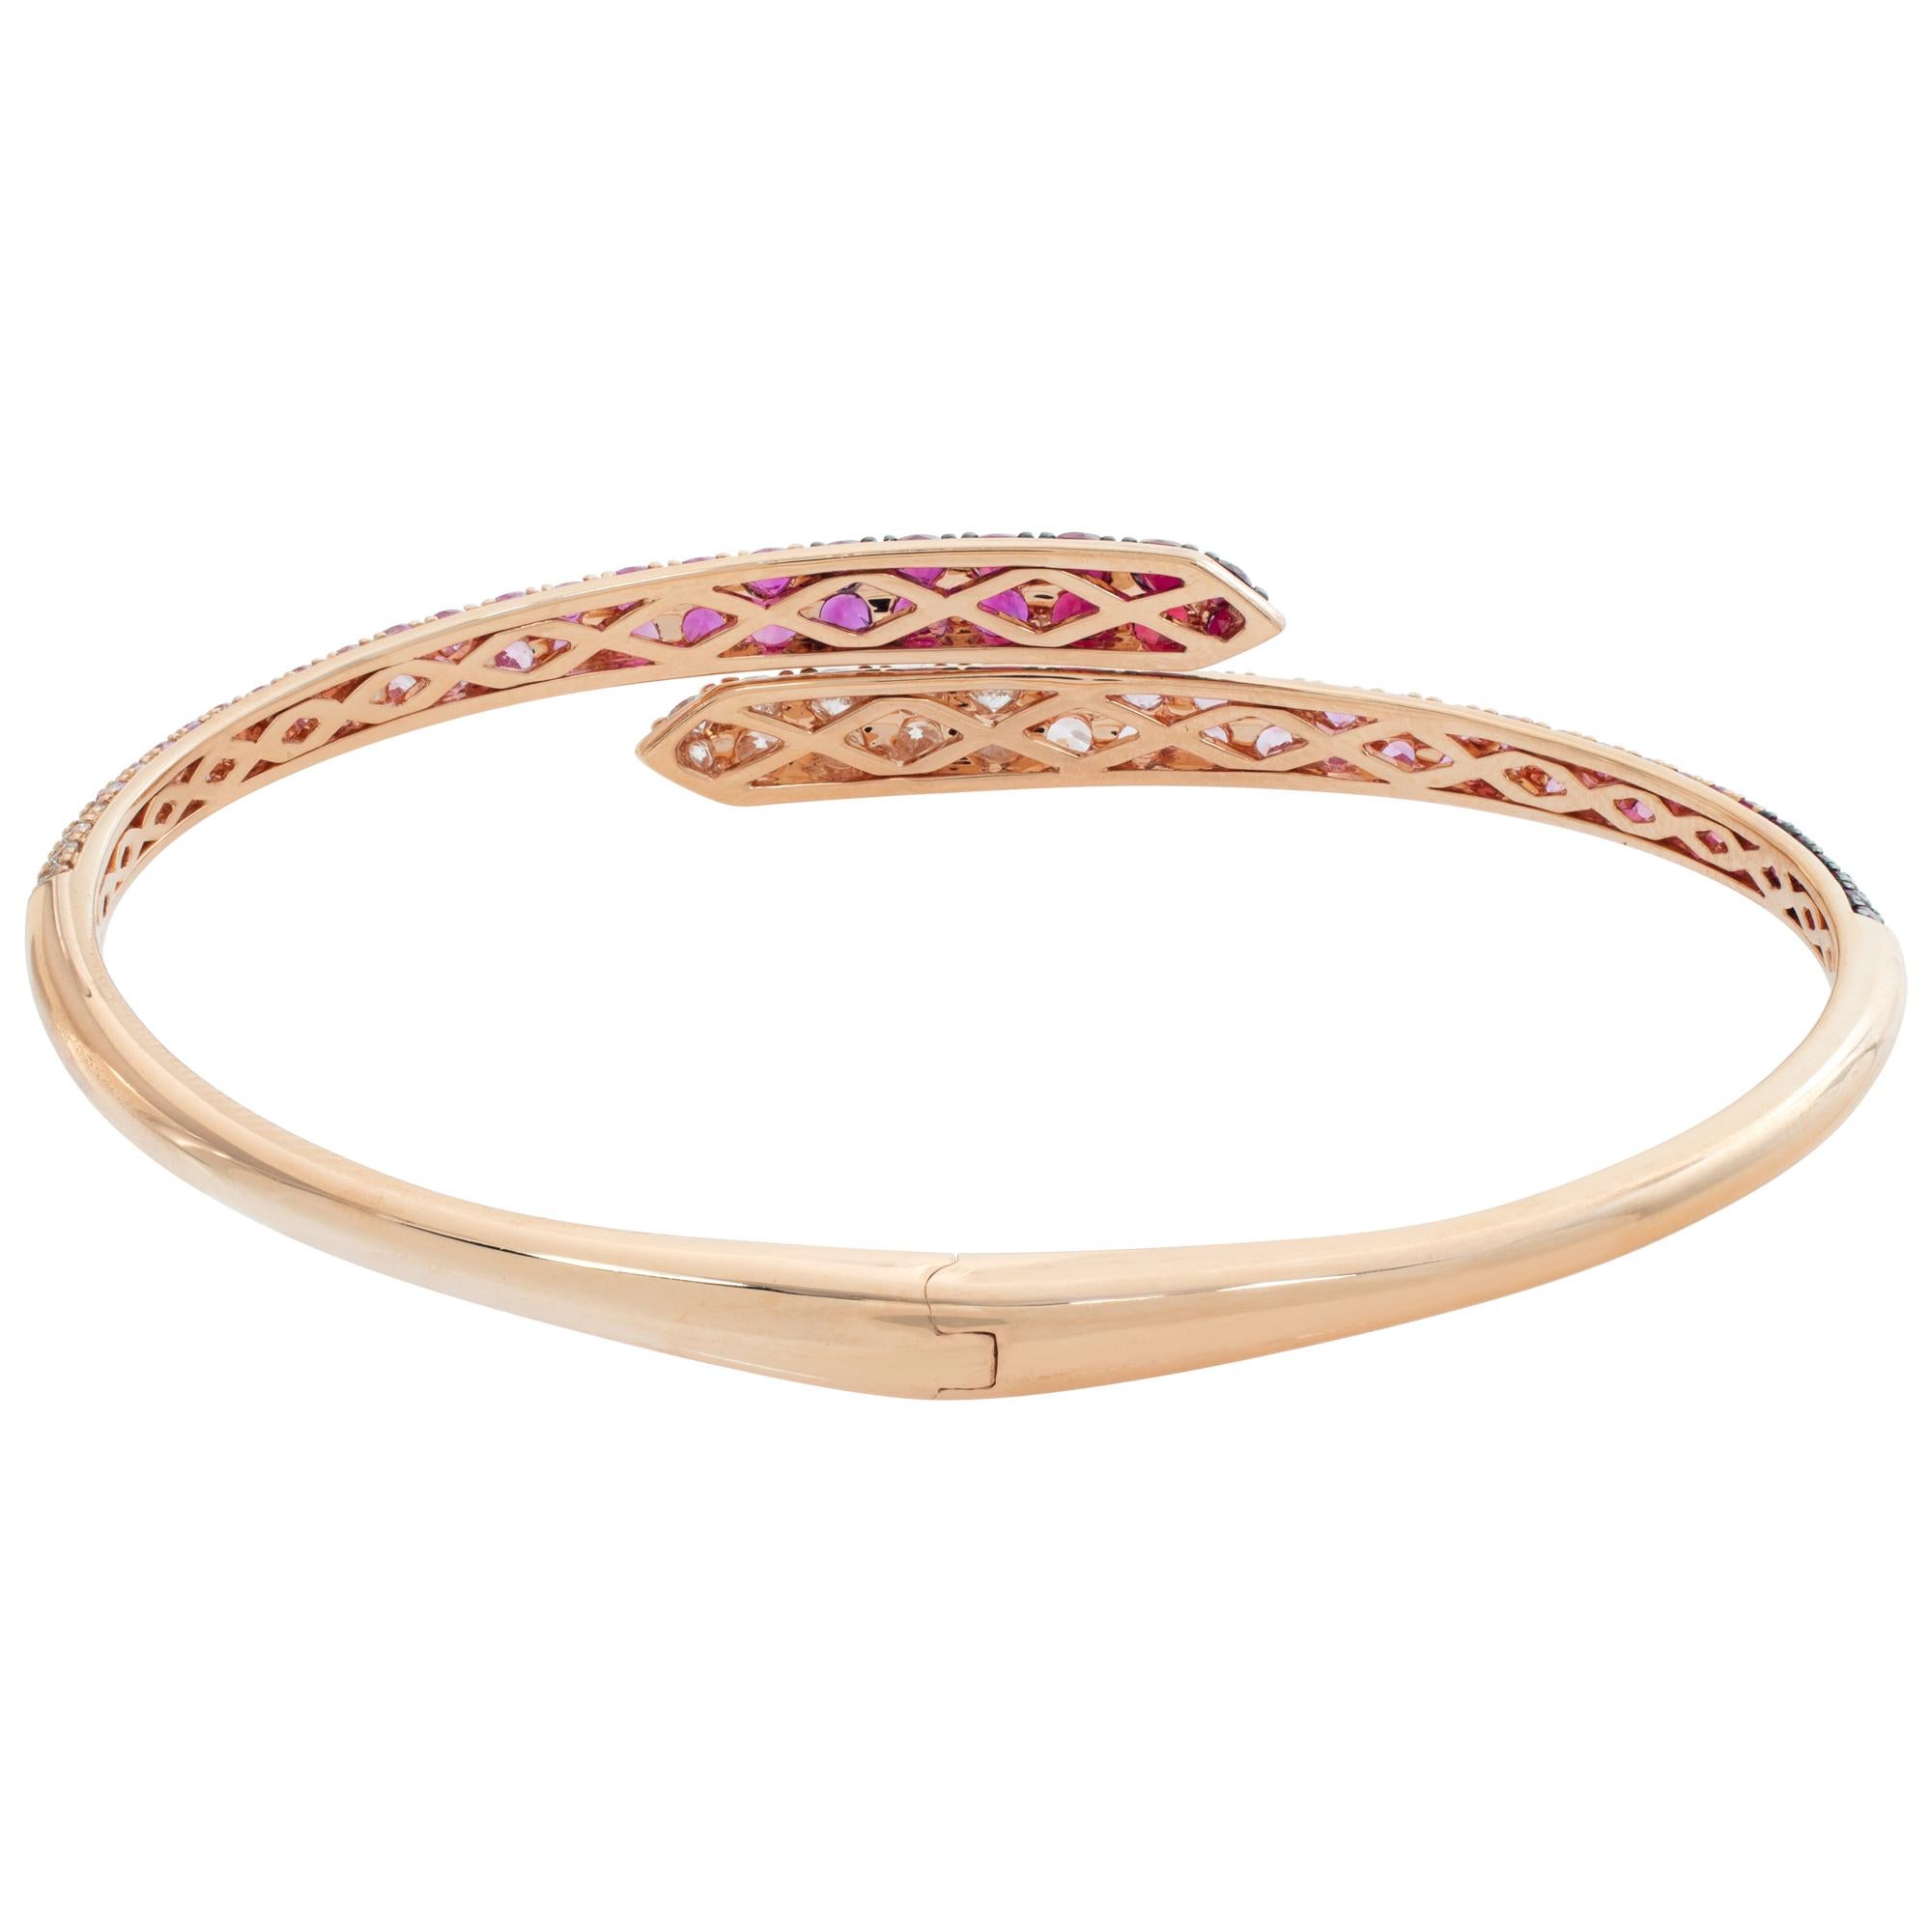 Diamonds, pink sapphires, and rubies 18k rose gold Bangle In Excellent Condition For Sale In Surfside, FL